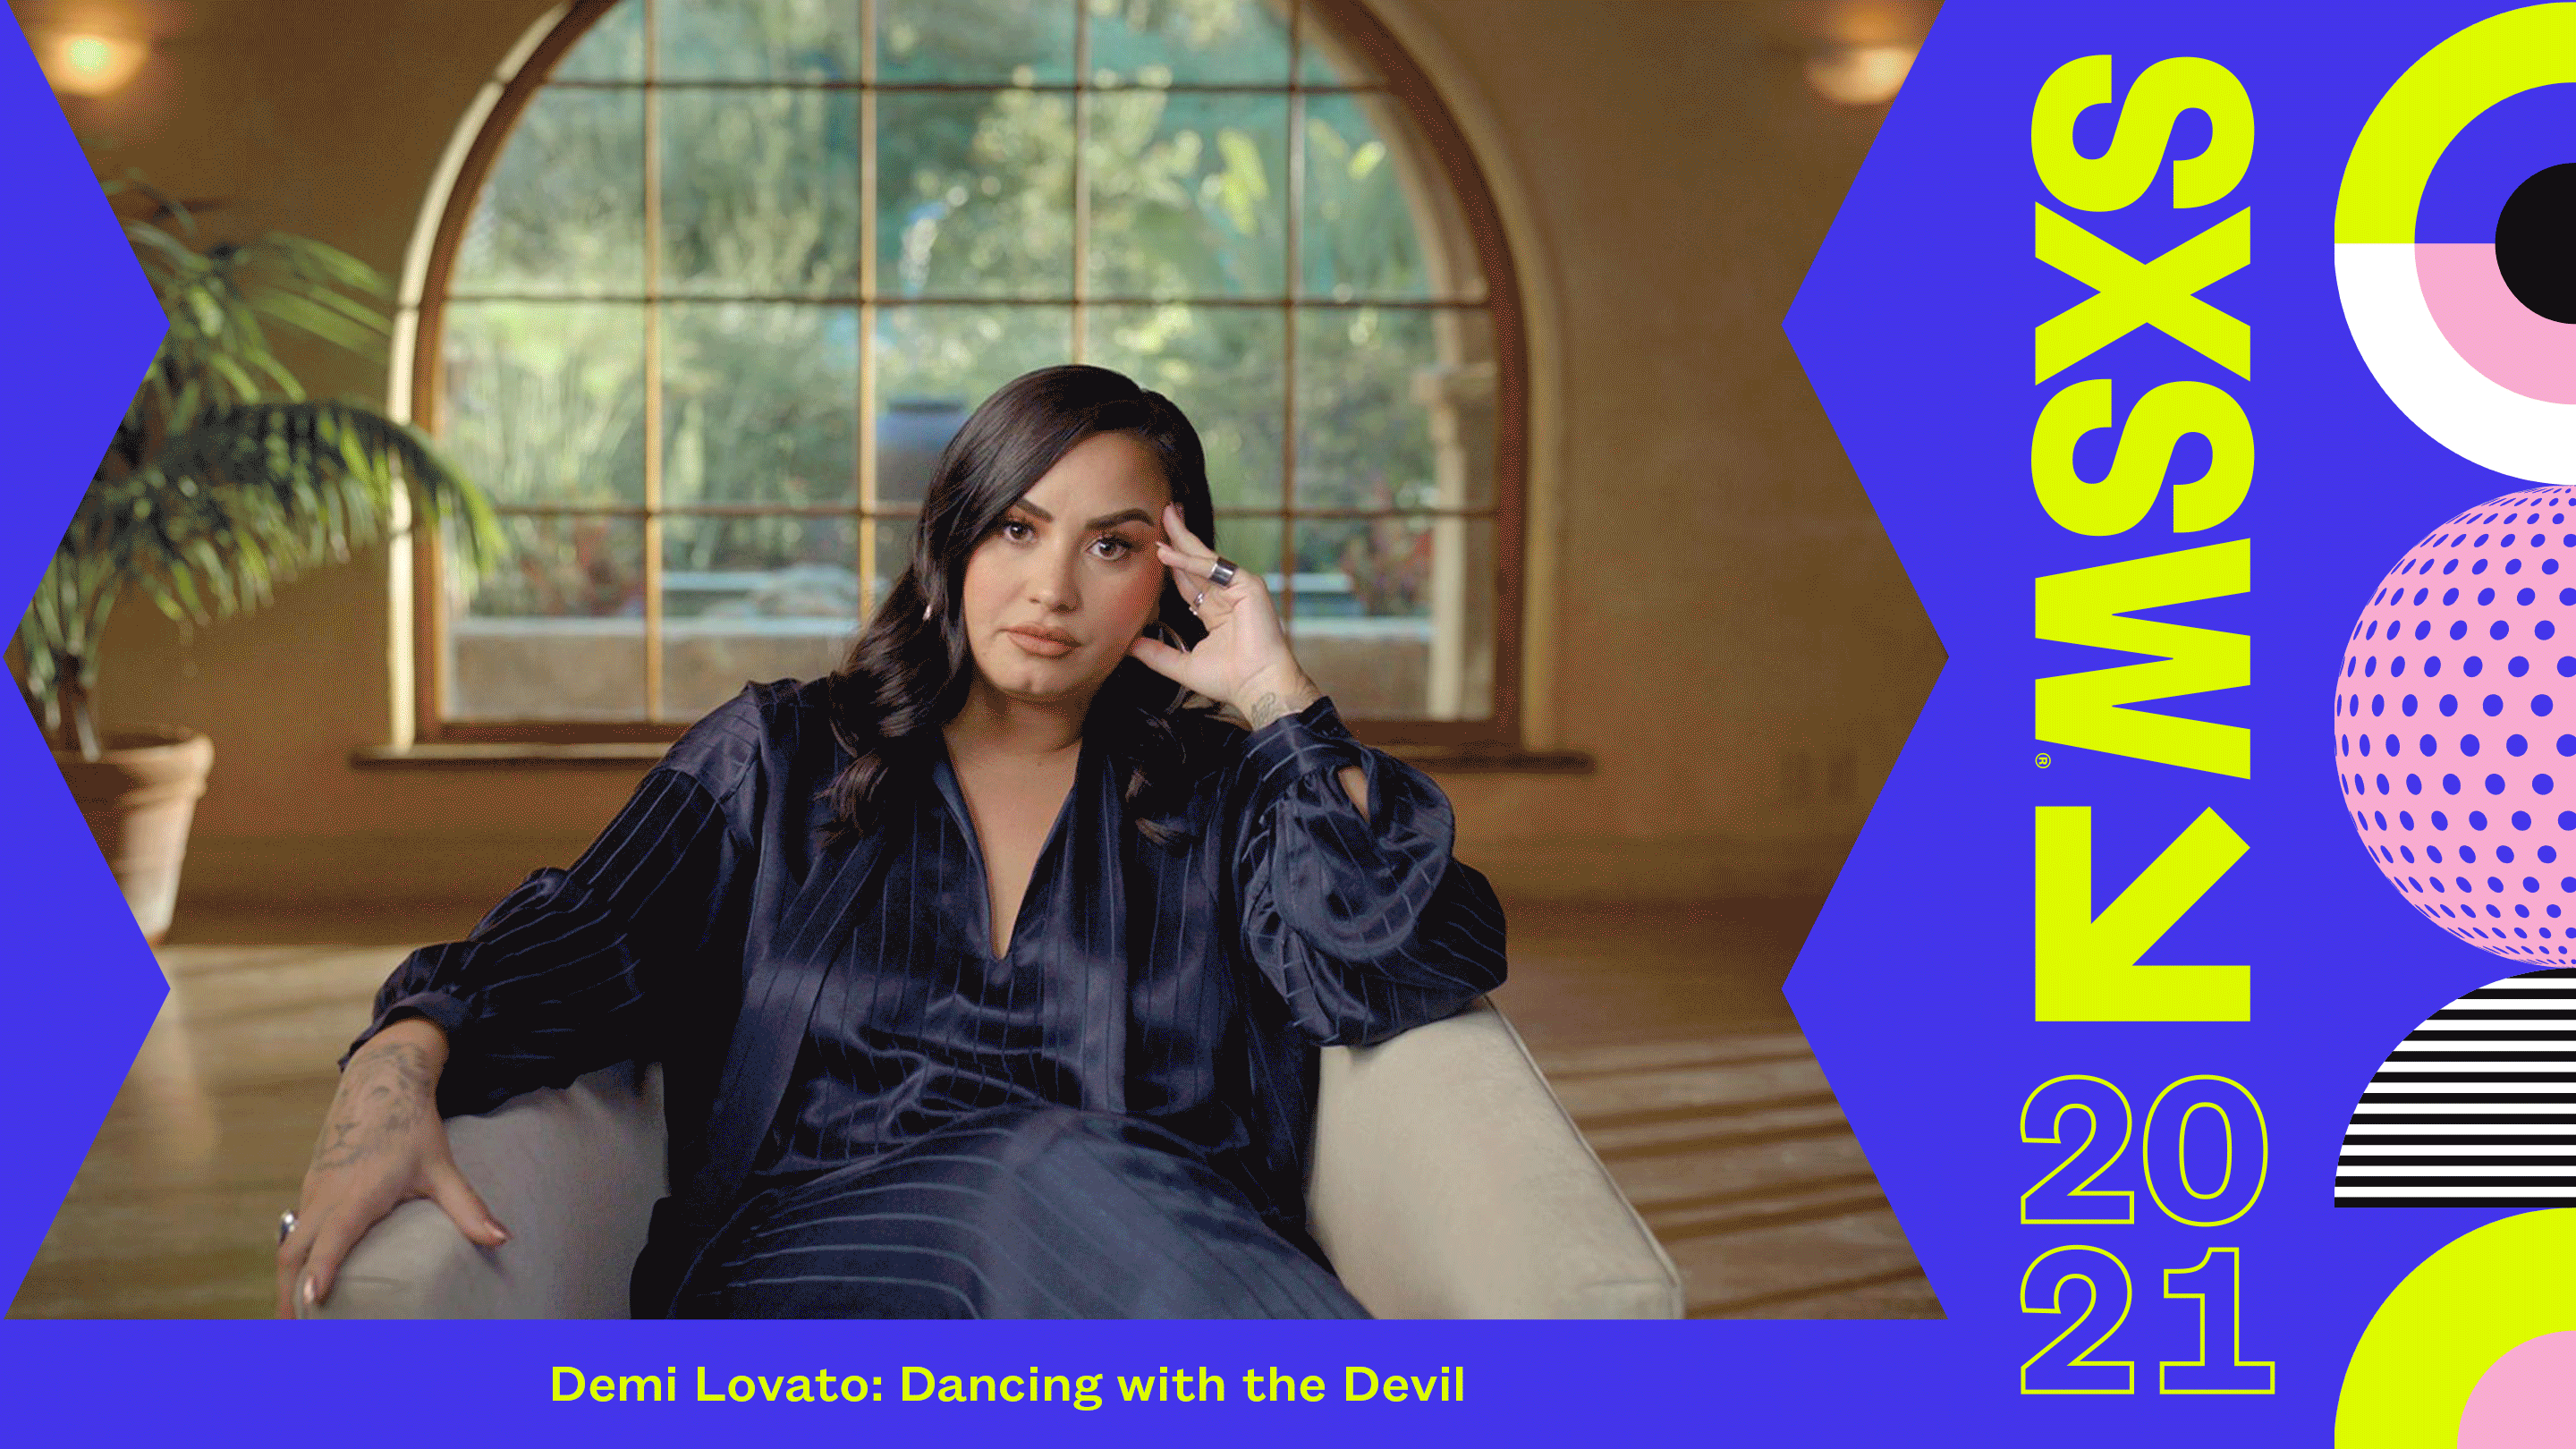 2021 SXSW Films, Demi Lovato: Dancing with the Devil (Opening Night Film); Tom Petty, Somewhere You Feel Free (Centerpiece Film); Alone Together (Closing Night Film); Best Summer Ever (2020 Spotlight); The Fallout (Narrative Feature Competition)